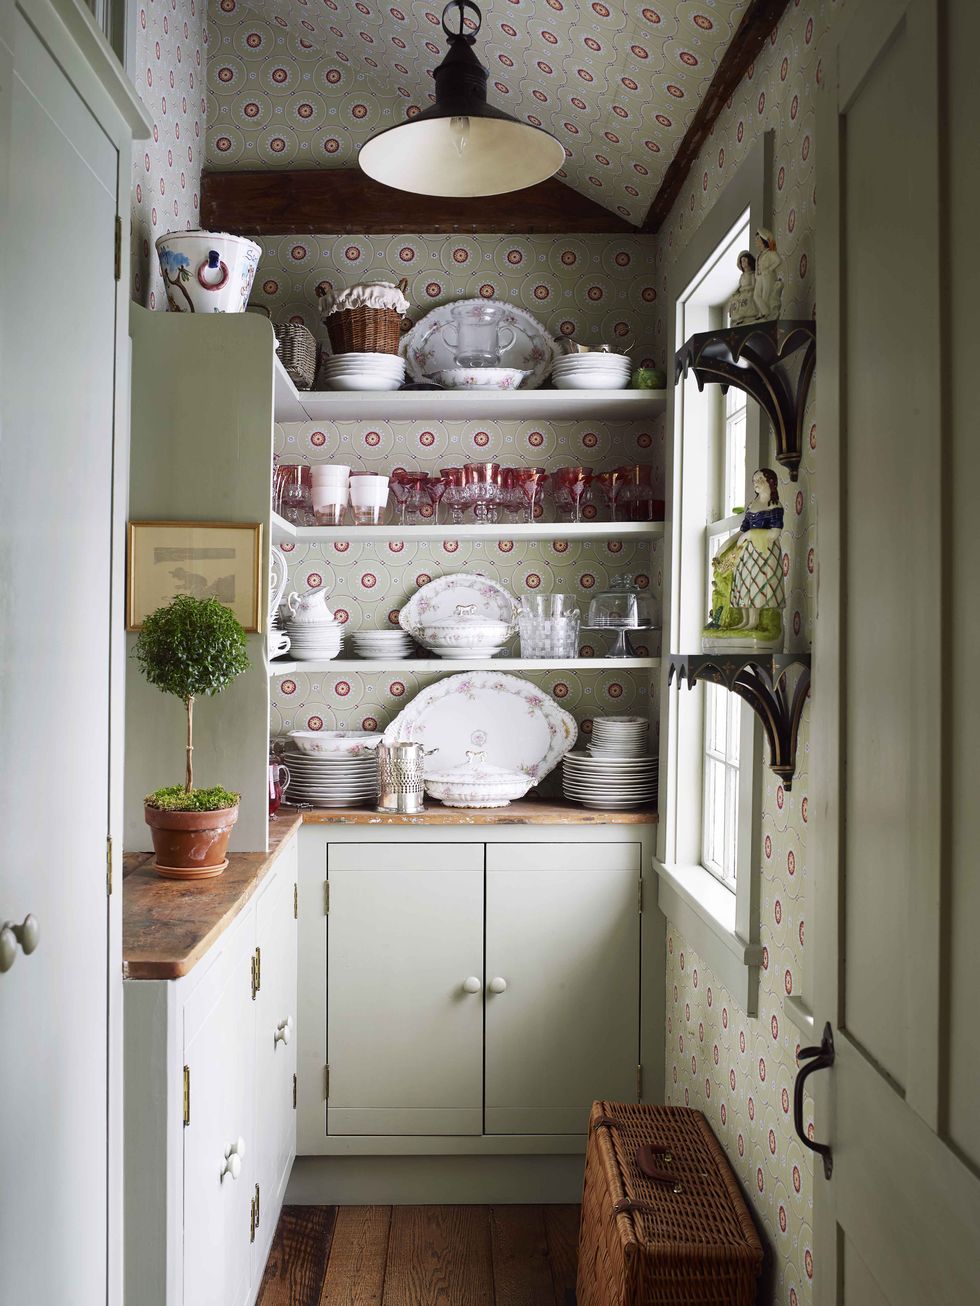 How To Organize Your Kitchen Cabinets, According To Experts